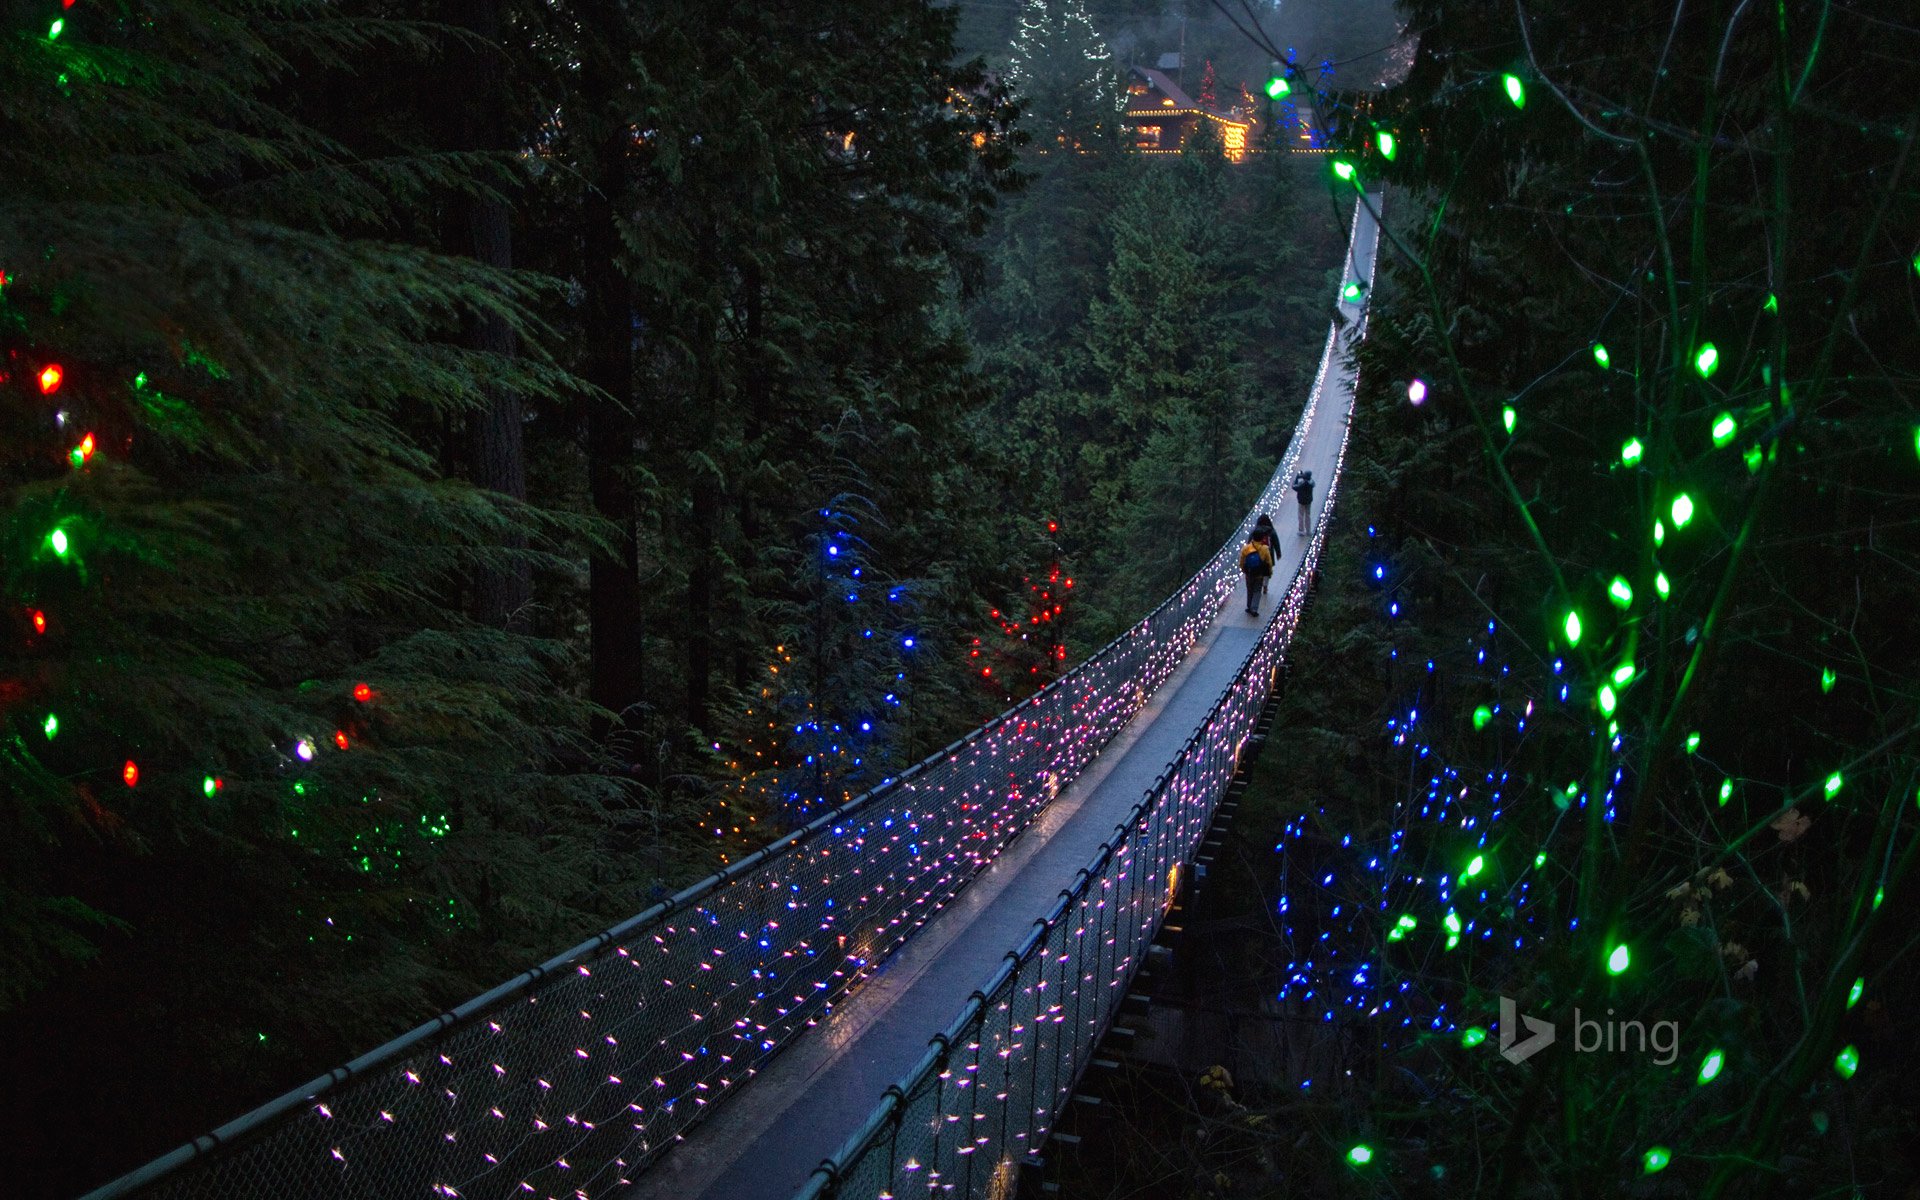 vancouver, British, Columbia, Canada, Capilano, British, Columbia, Canada, The, Suspension, Bridge, Bridge, Trees, Forest, Nature, Holiday, Lights, People, Landscape Wallpaper